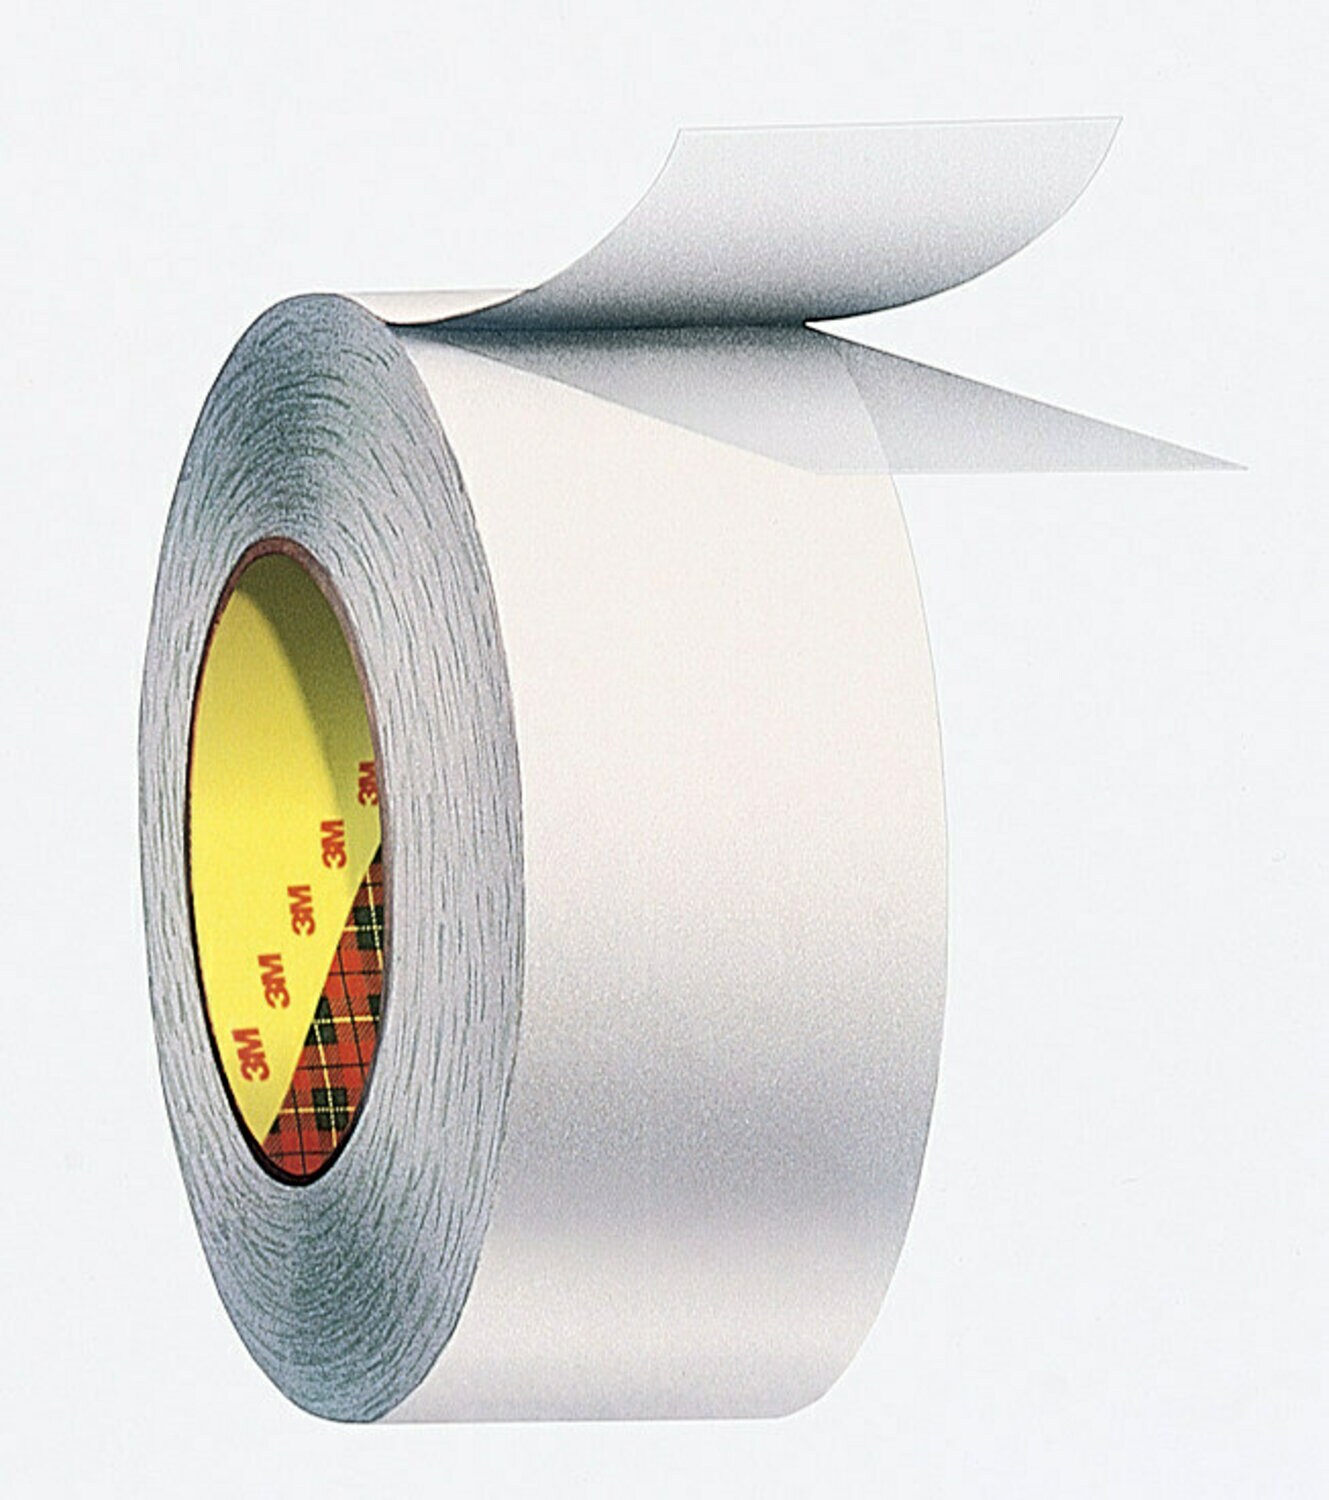 7100006482 - 3M Removable Repositionable Tape 665, Clear, 3.8 mil, Roll, Config